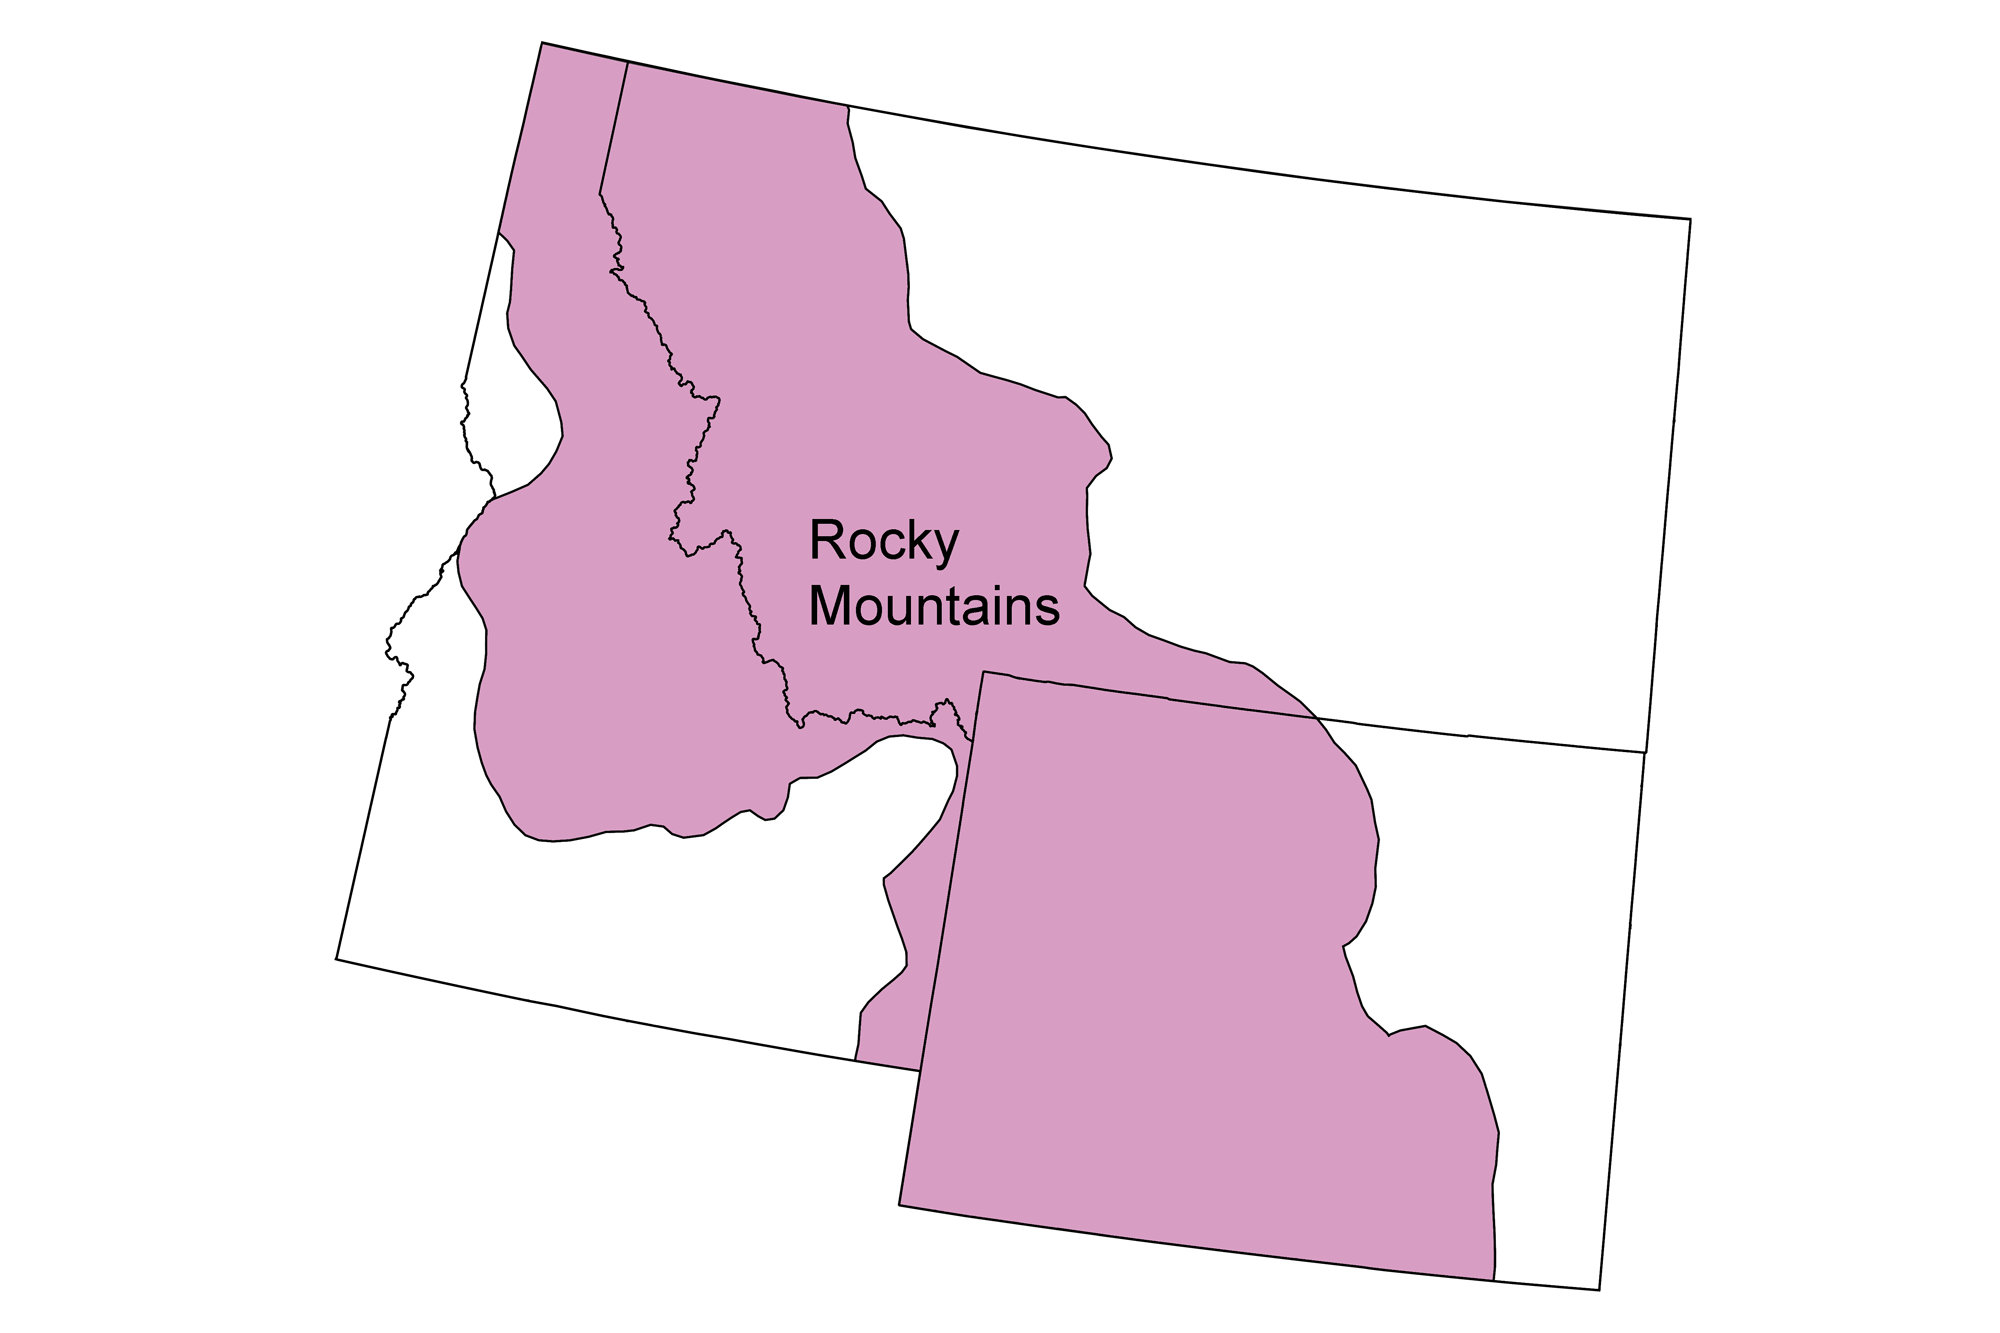 Simple map showing the Rocky Mountain region of the northwest-central United States.